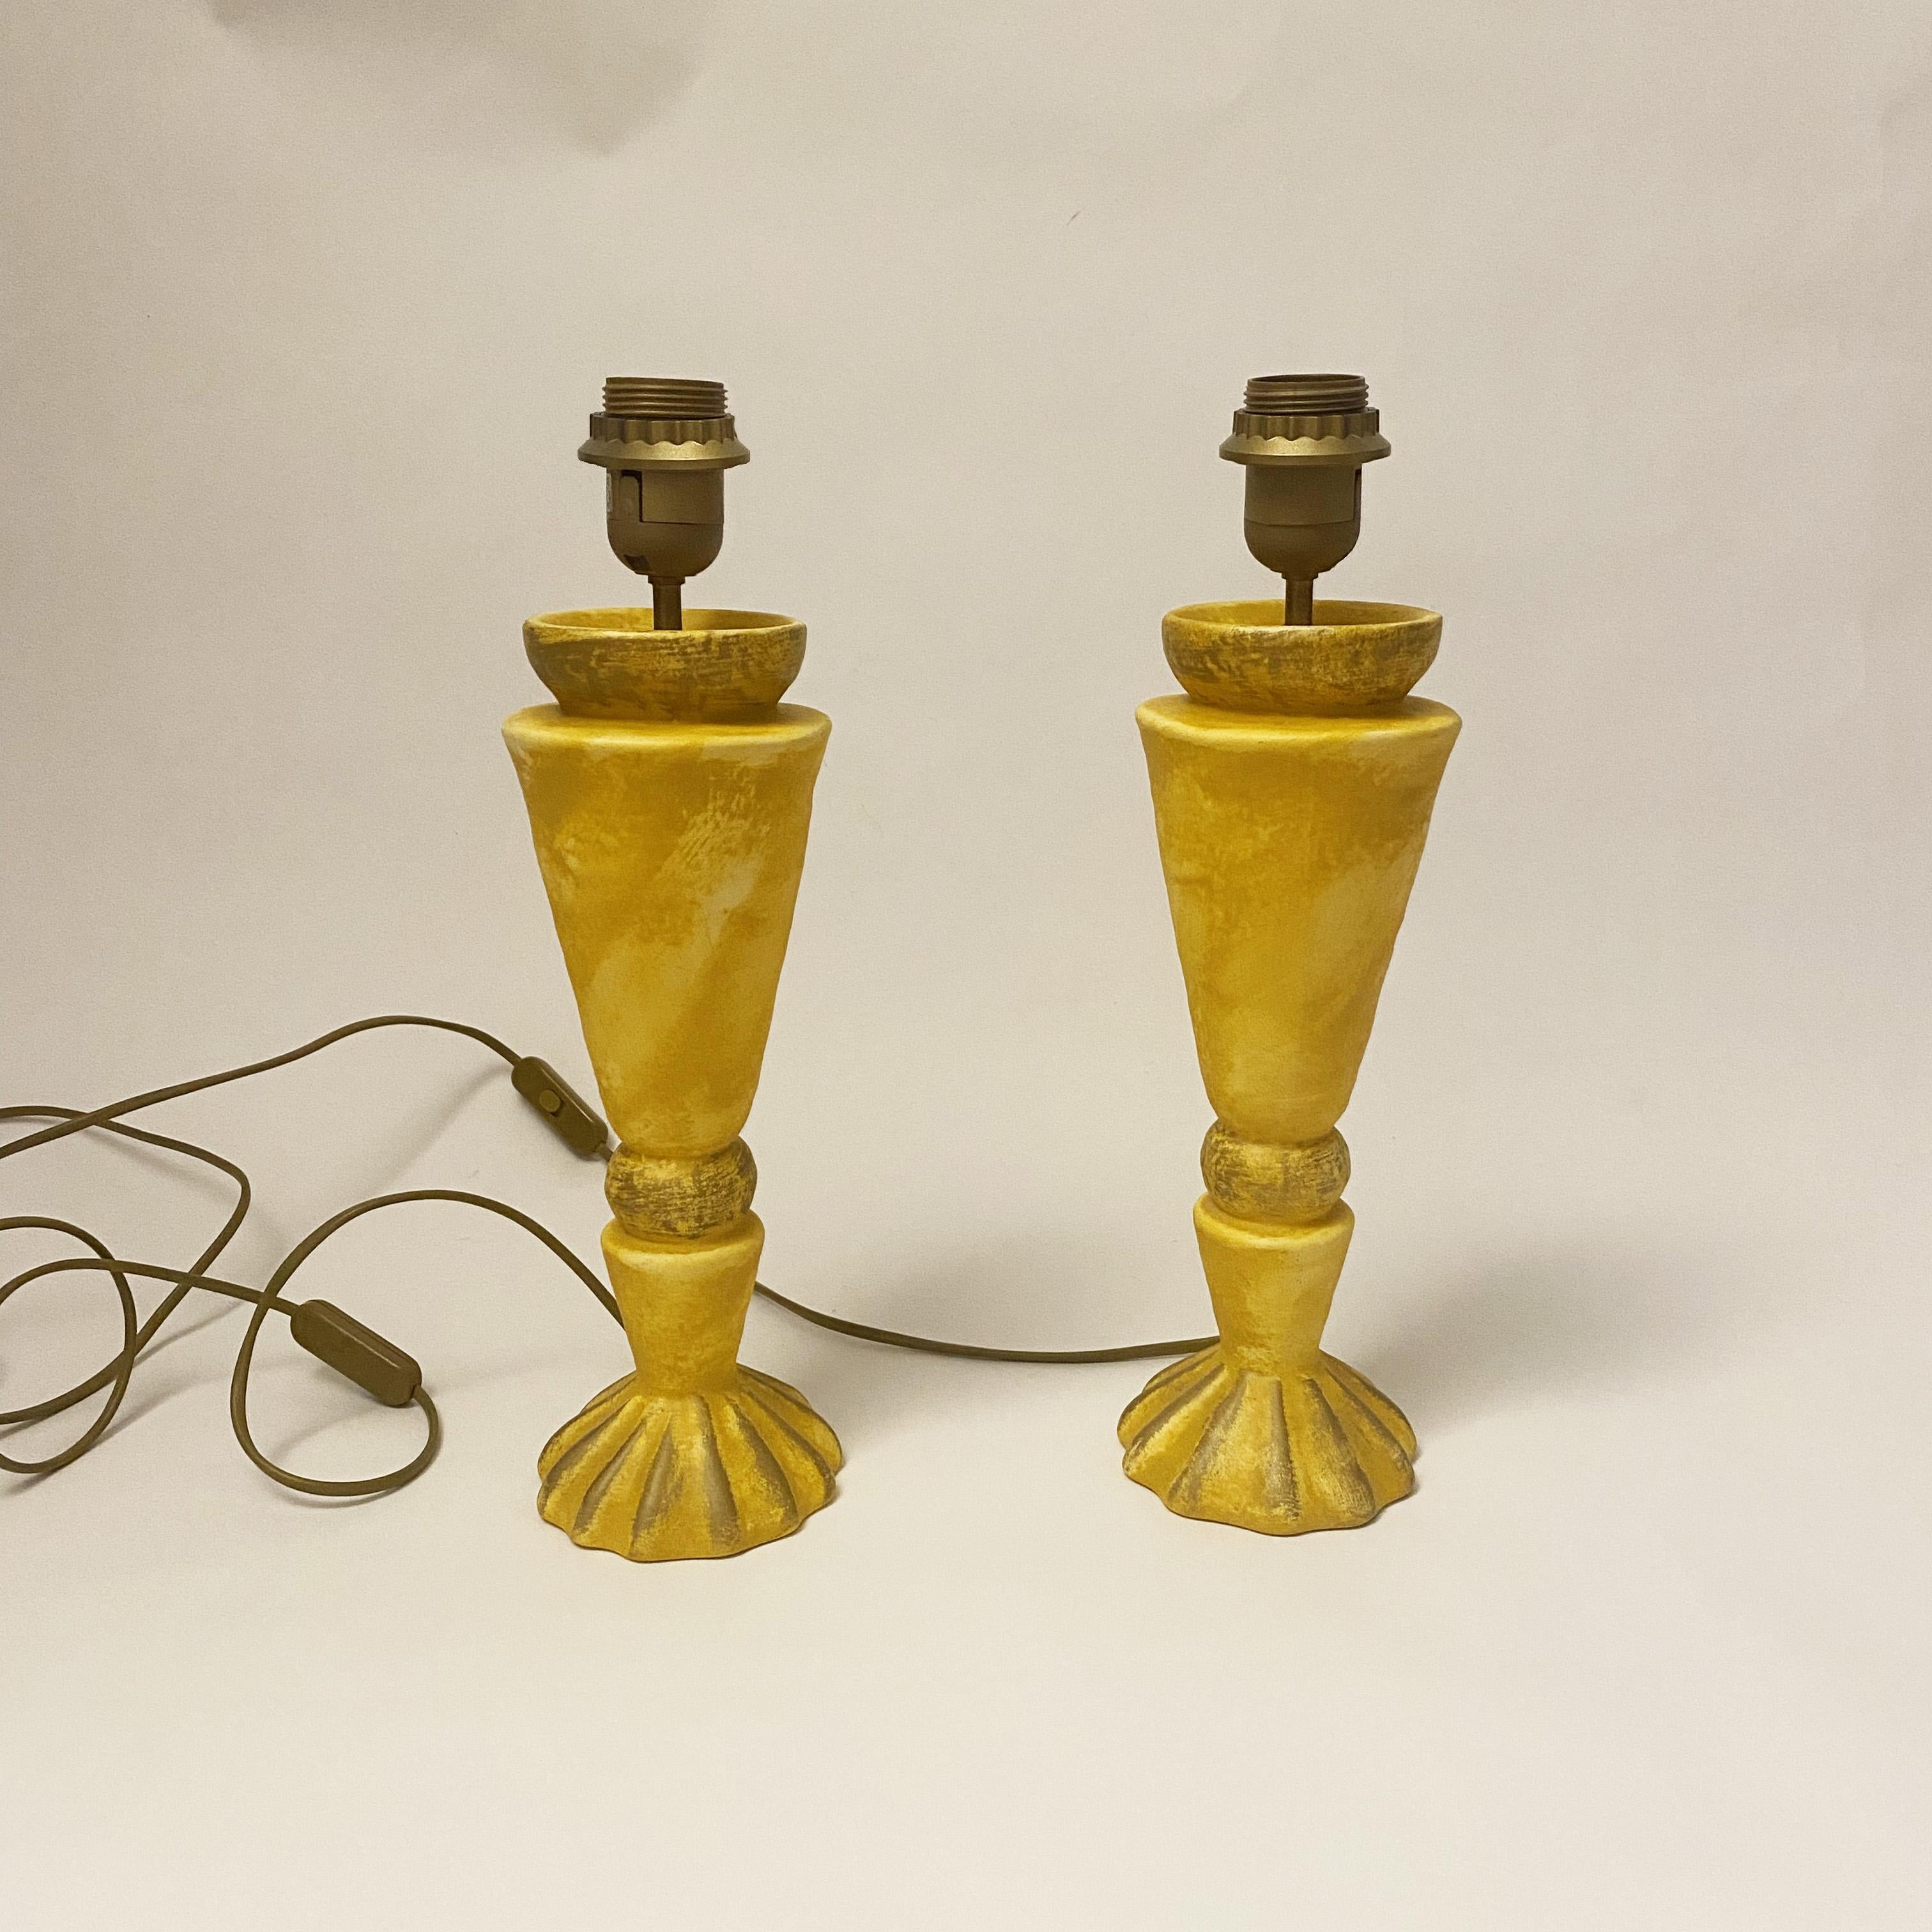 Sculptural Lamps by Pierre Casenove for Lunéville, 'No Fondica', France, 1990s In Good Condition For Sale In Lille, FR